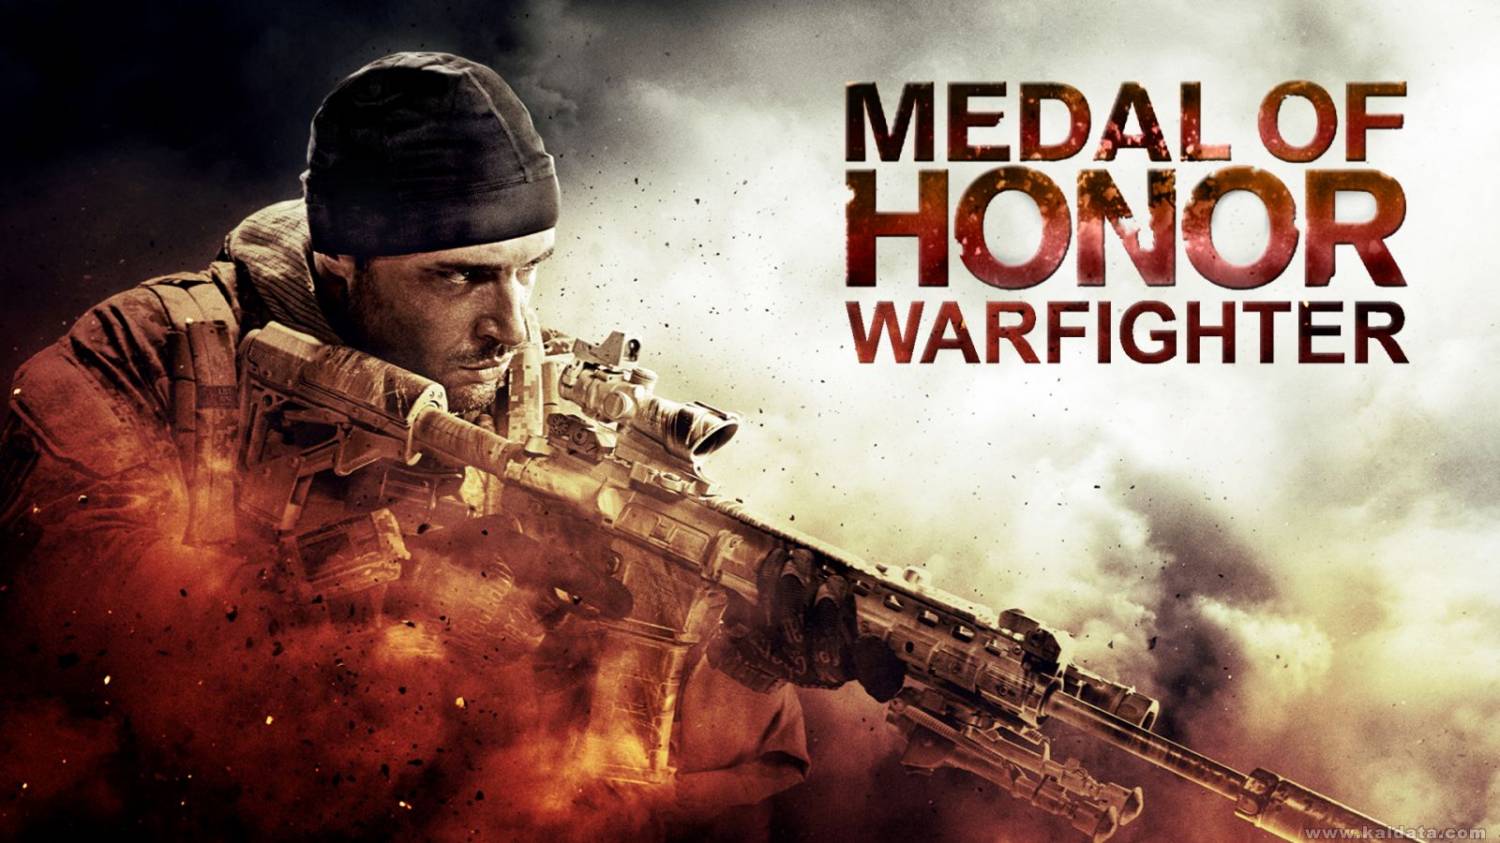 Medal of Honor: Warfighter - Digital Deluxe Edition (2012) PC | RePack от R.G. Механики